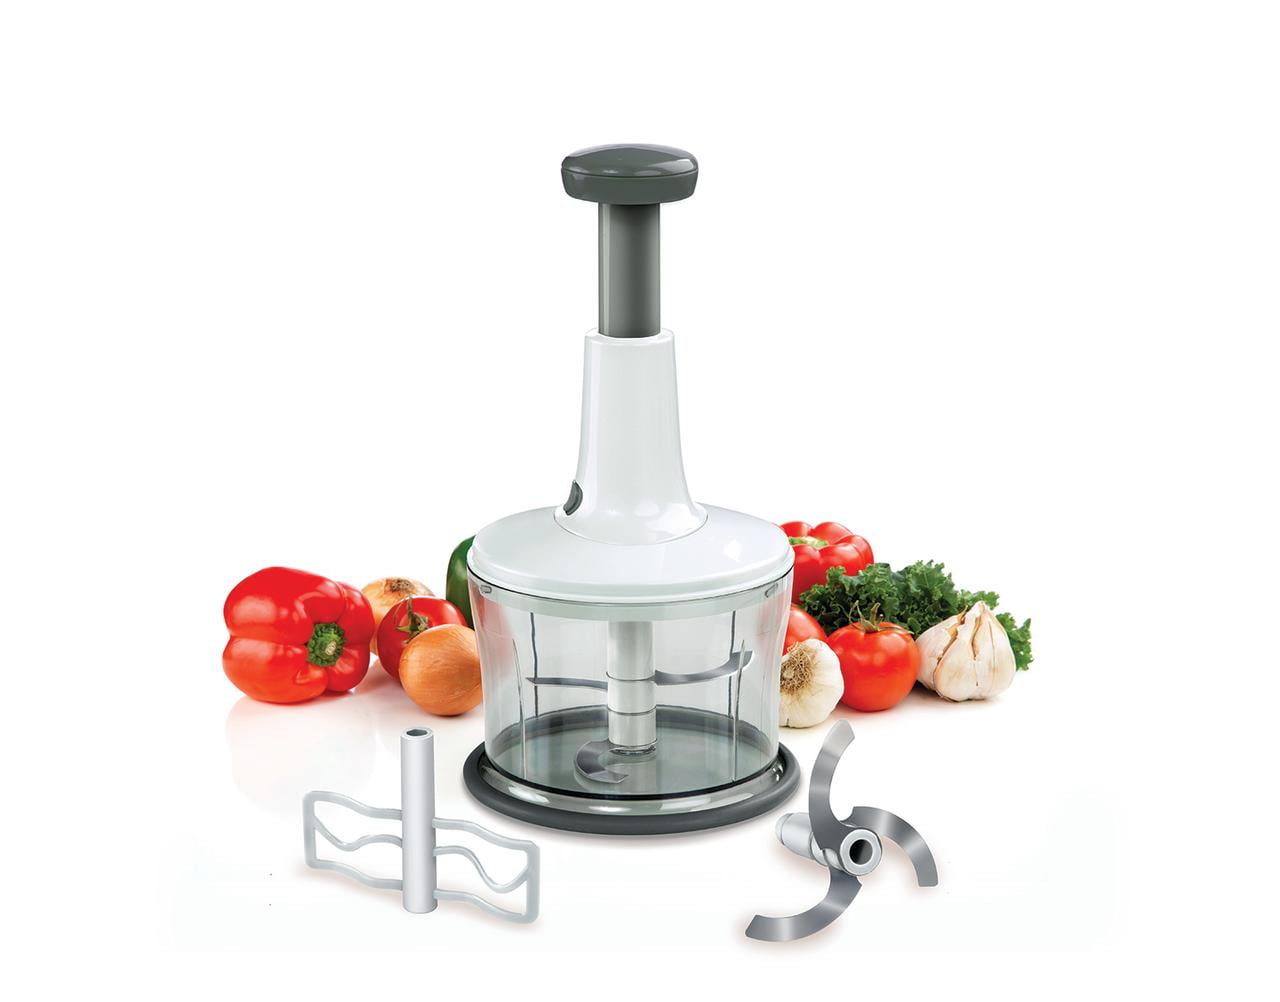 Ultra Chef Express 7 In 1 Food Chopper - As Seen On Tv Manual Food